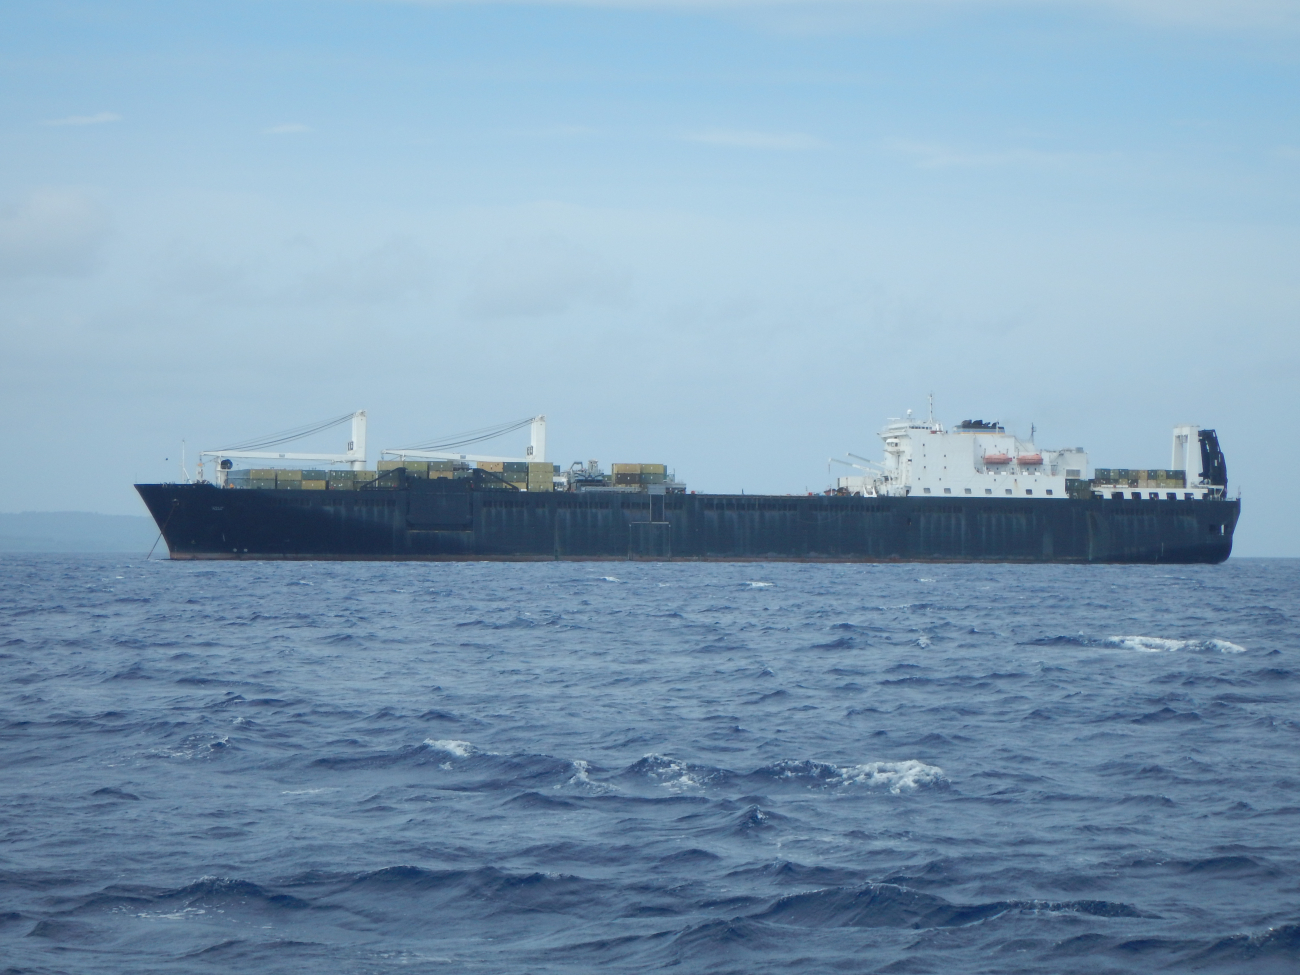 Military Sealift Command vessel anchored offshore from Saipan